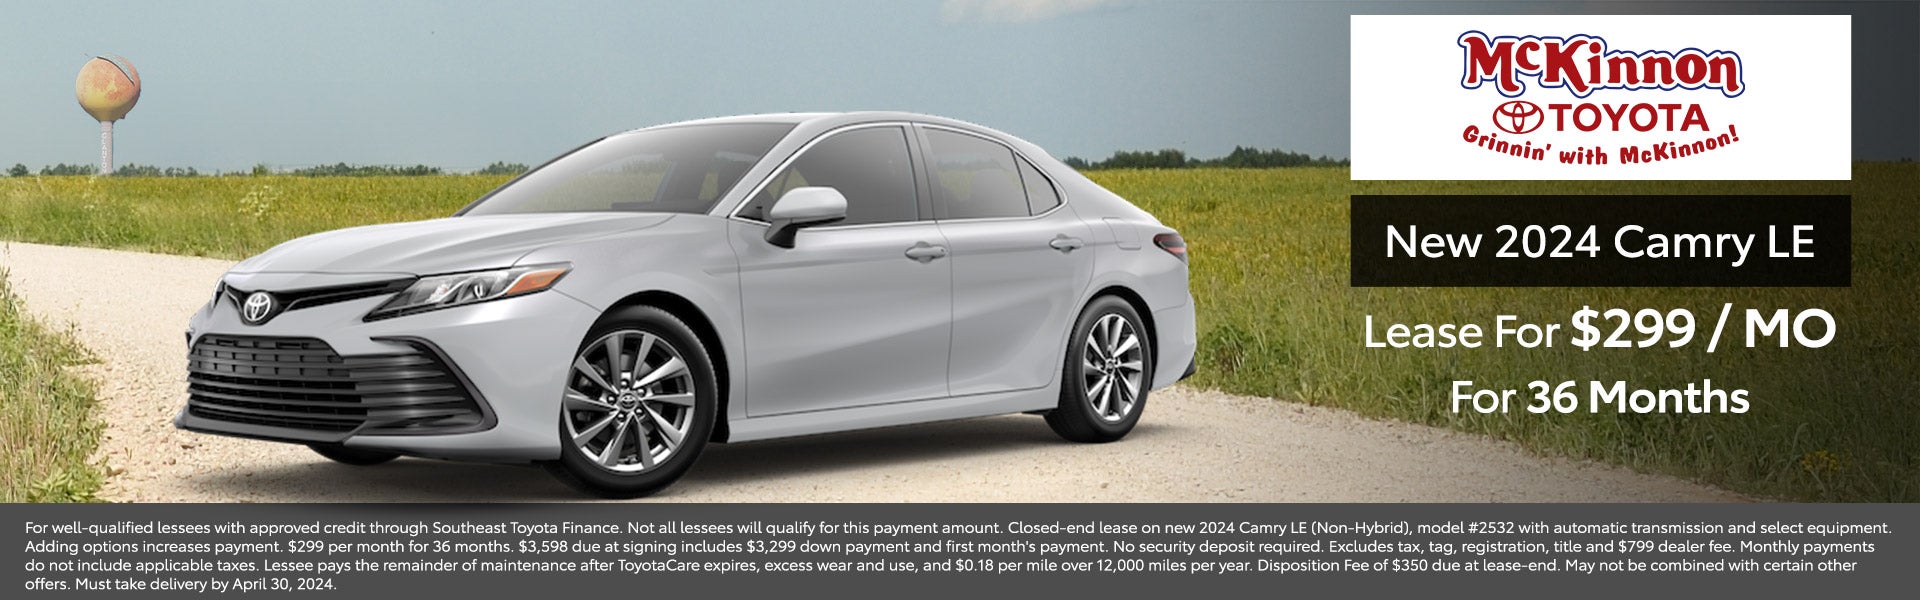 2024 Camry Offer